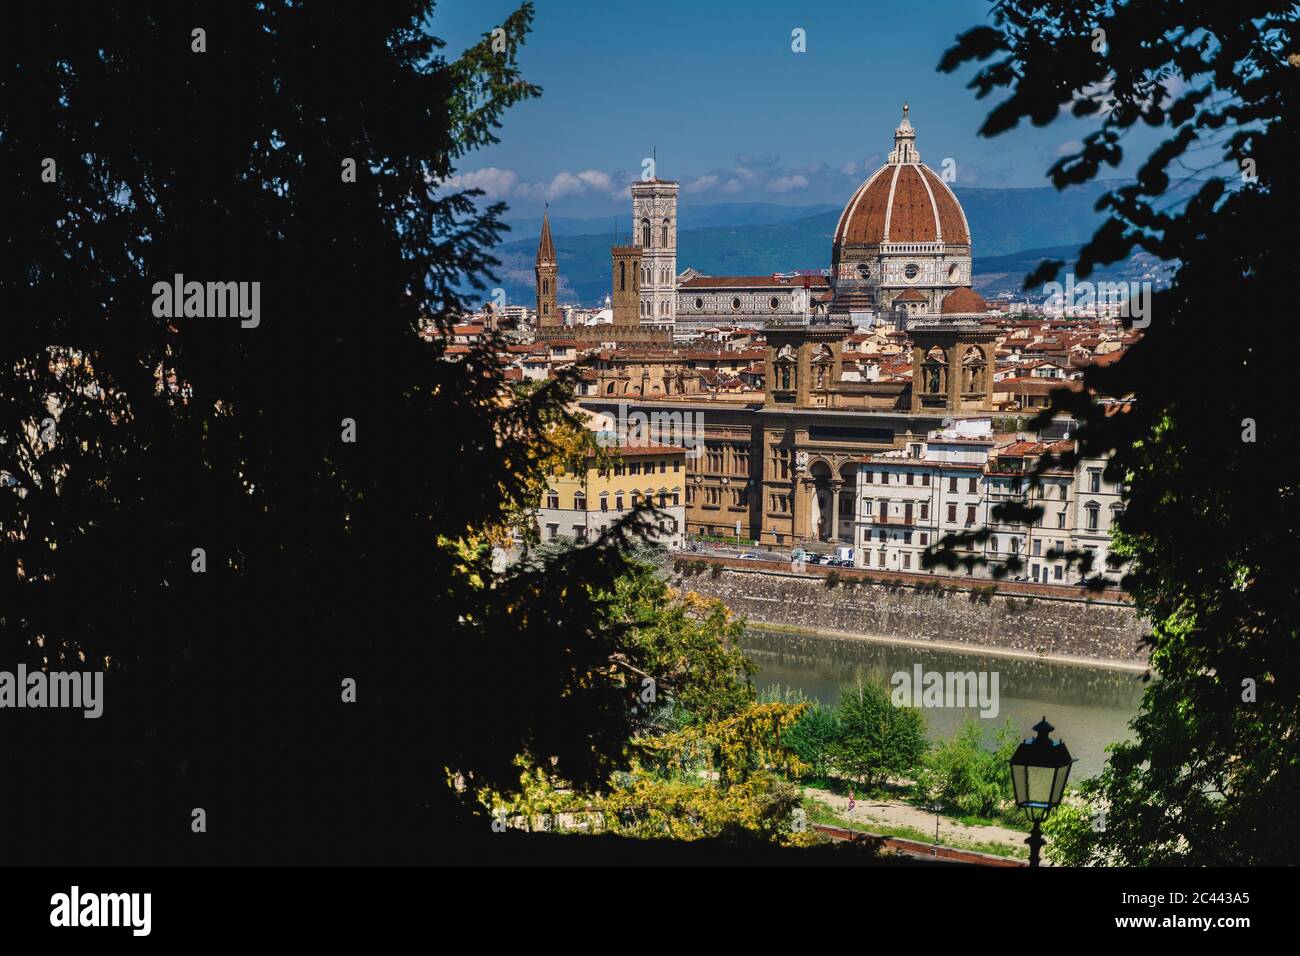 Italy, Tuscany, Florence, Cathedral Santa Maria del Fiore dome and buildings in old town Stock Photo